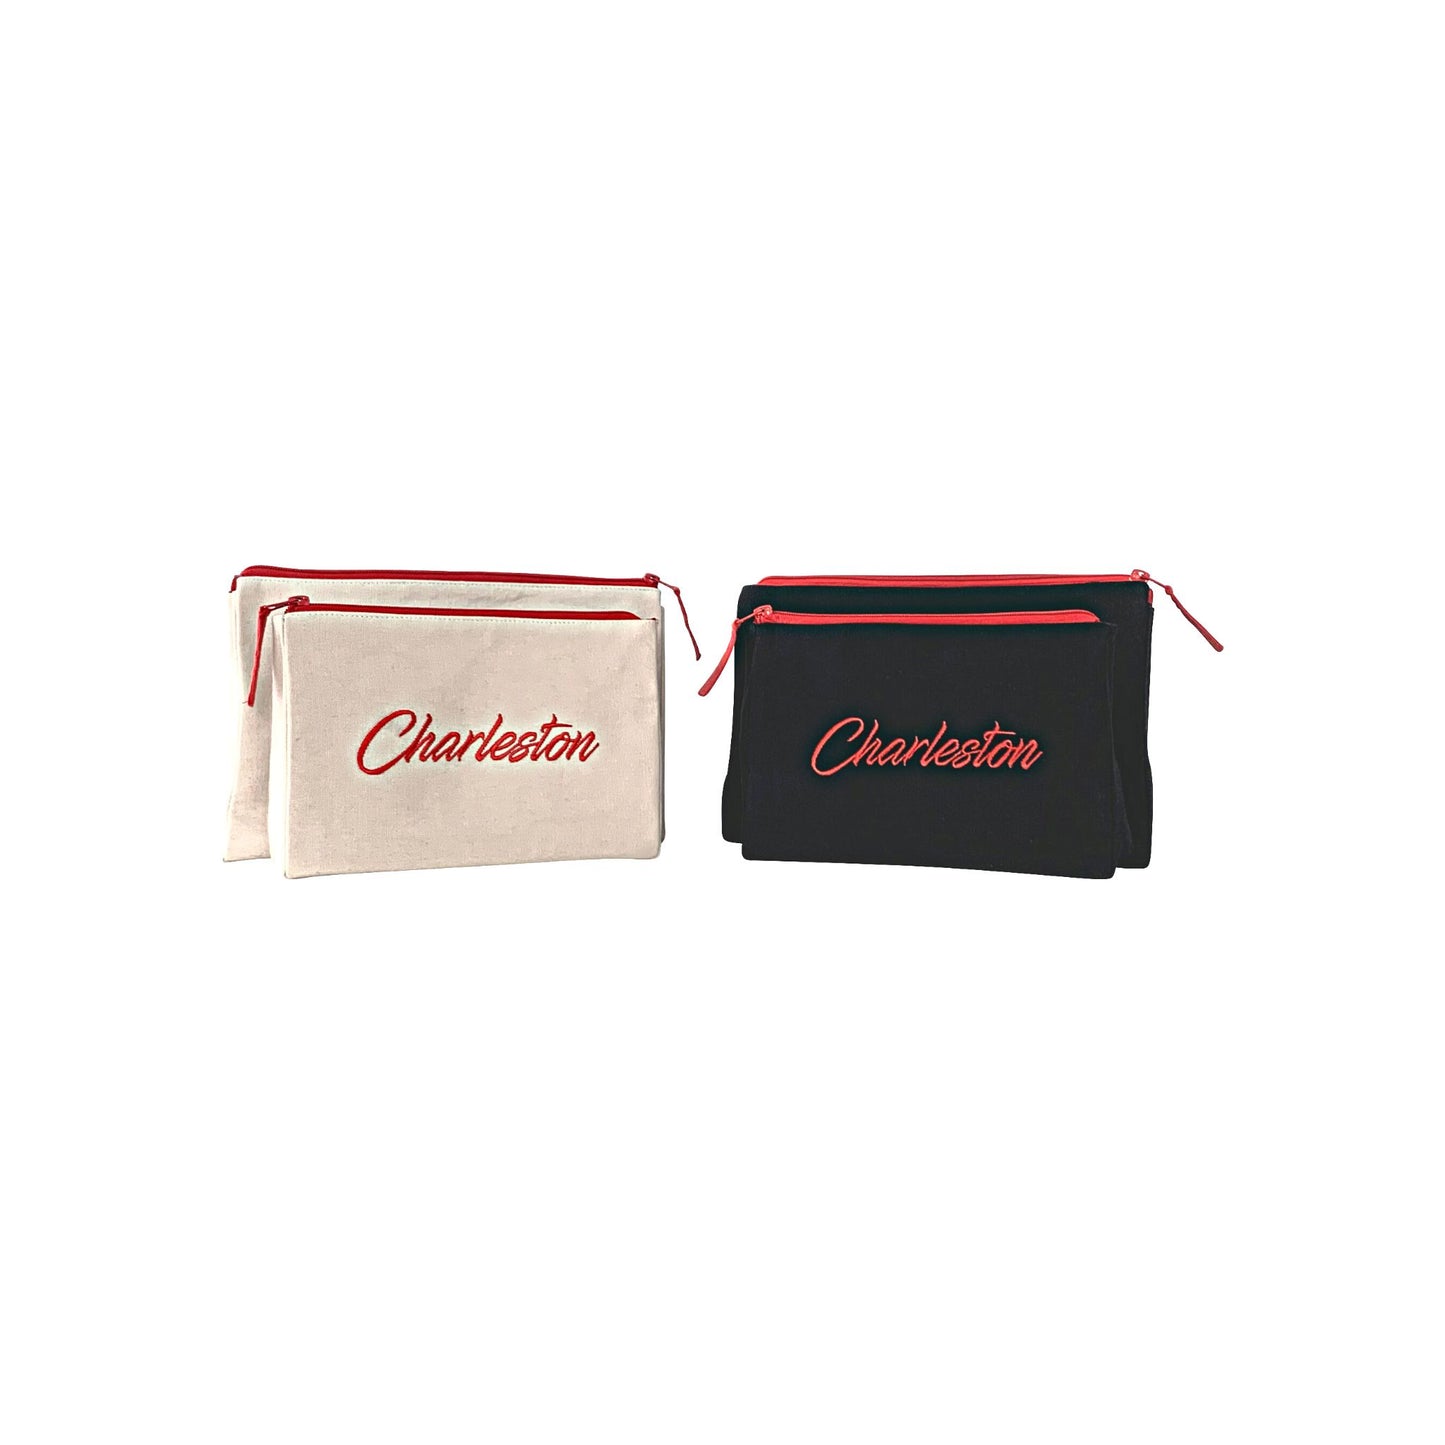 Charleston, SC makeup bag sets in Day and Night